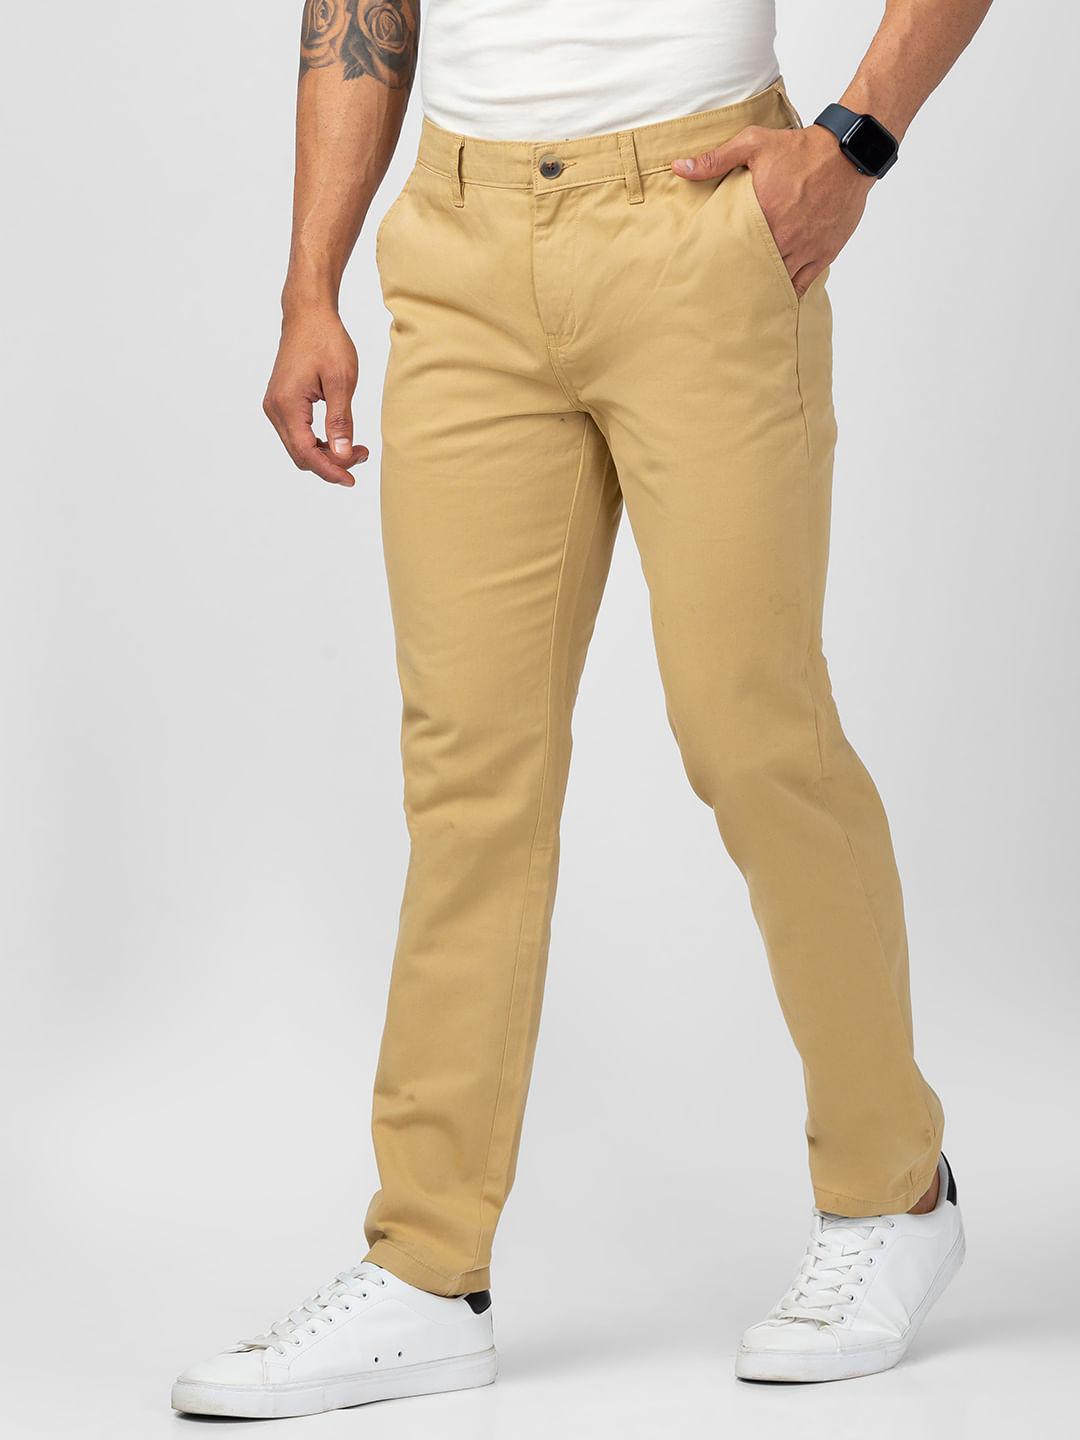 Men's trouser | Chinos & jeans Styles |Slim Fit – JDC Store Online Shopping